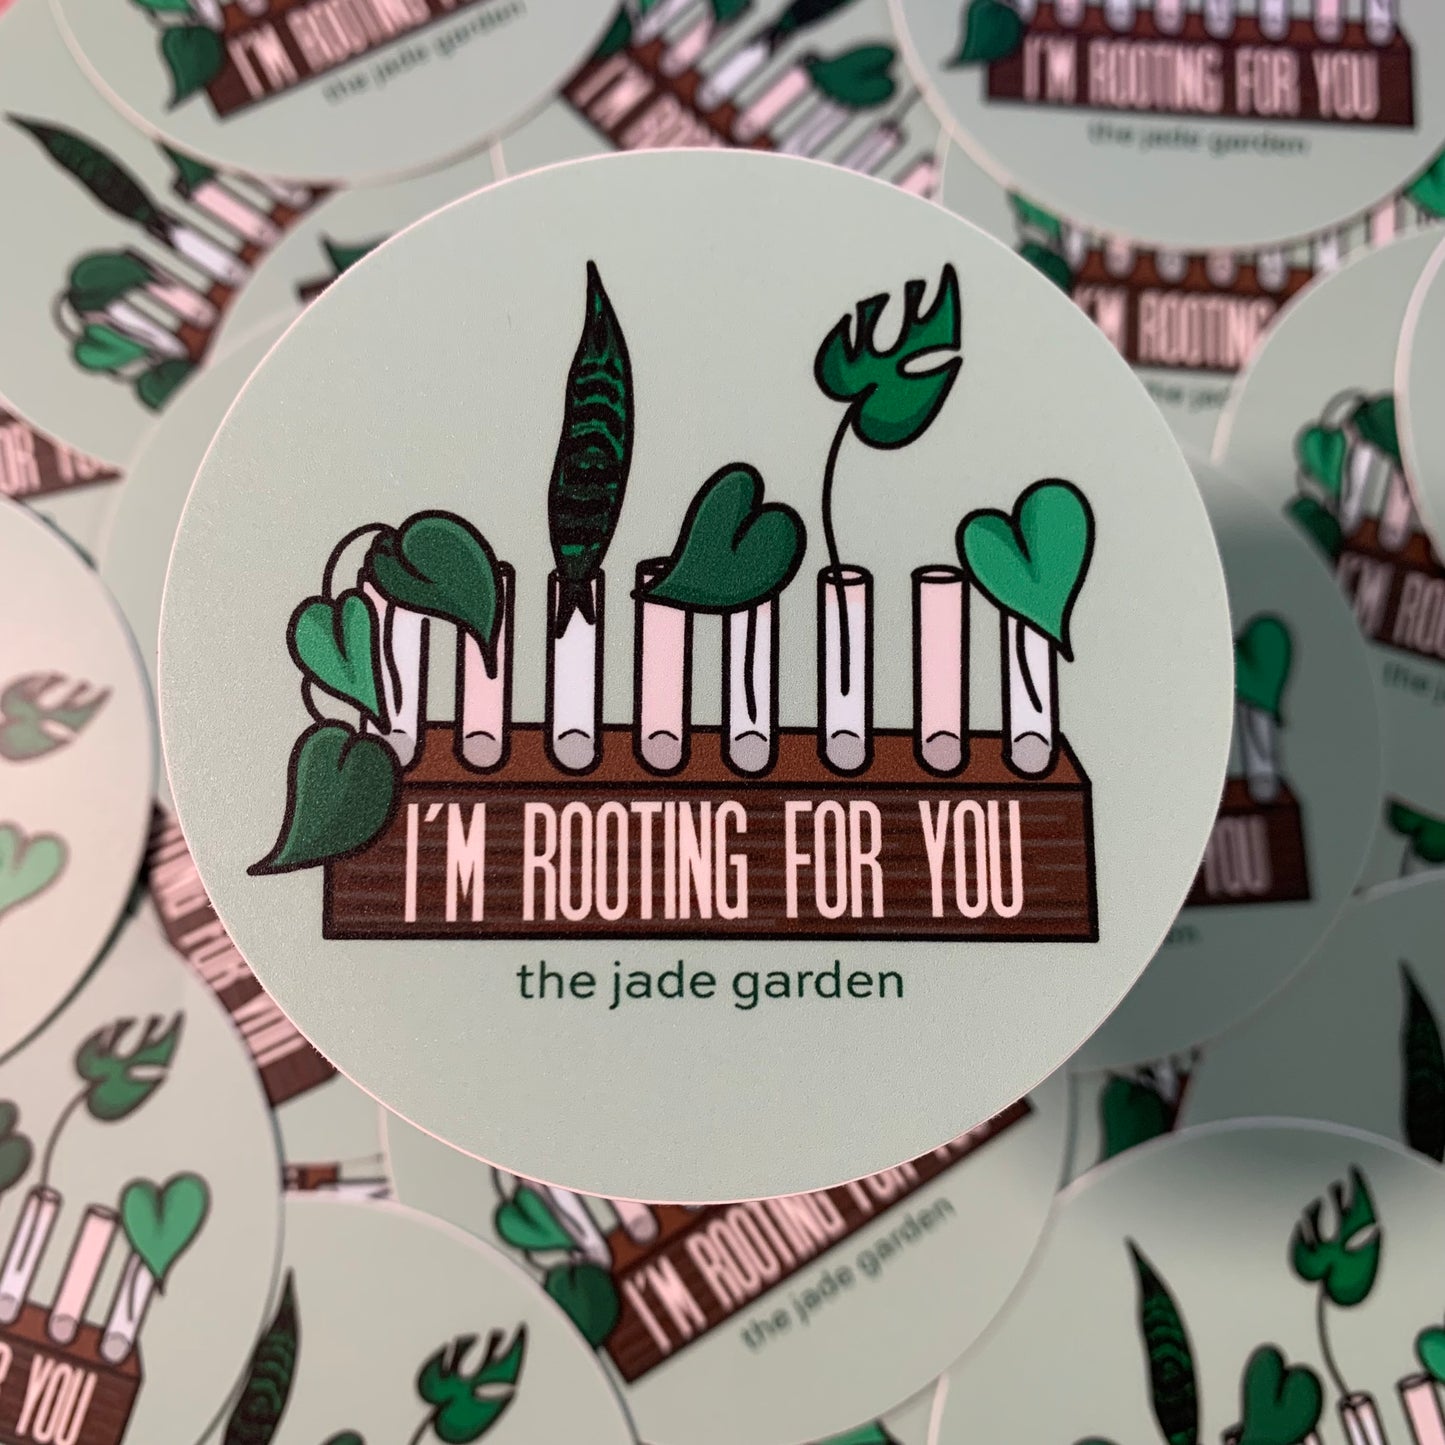 A sage green sticker, with a drawn design of a propagation station with leaves within the glass vials. "I'M ROOTING FOR YOU" is written on the wooden stand of the propogation station with "the jade garden" featured underneath.